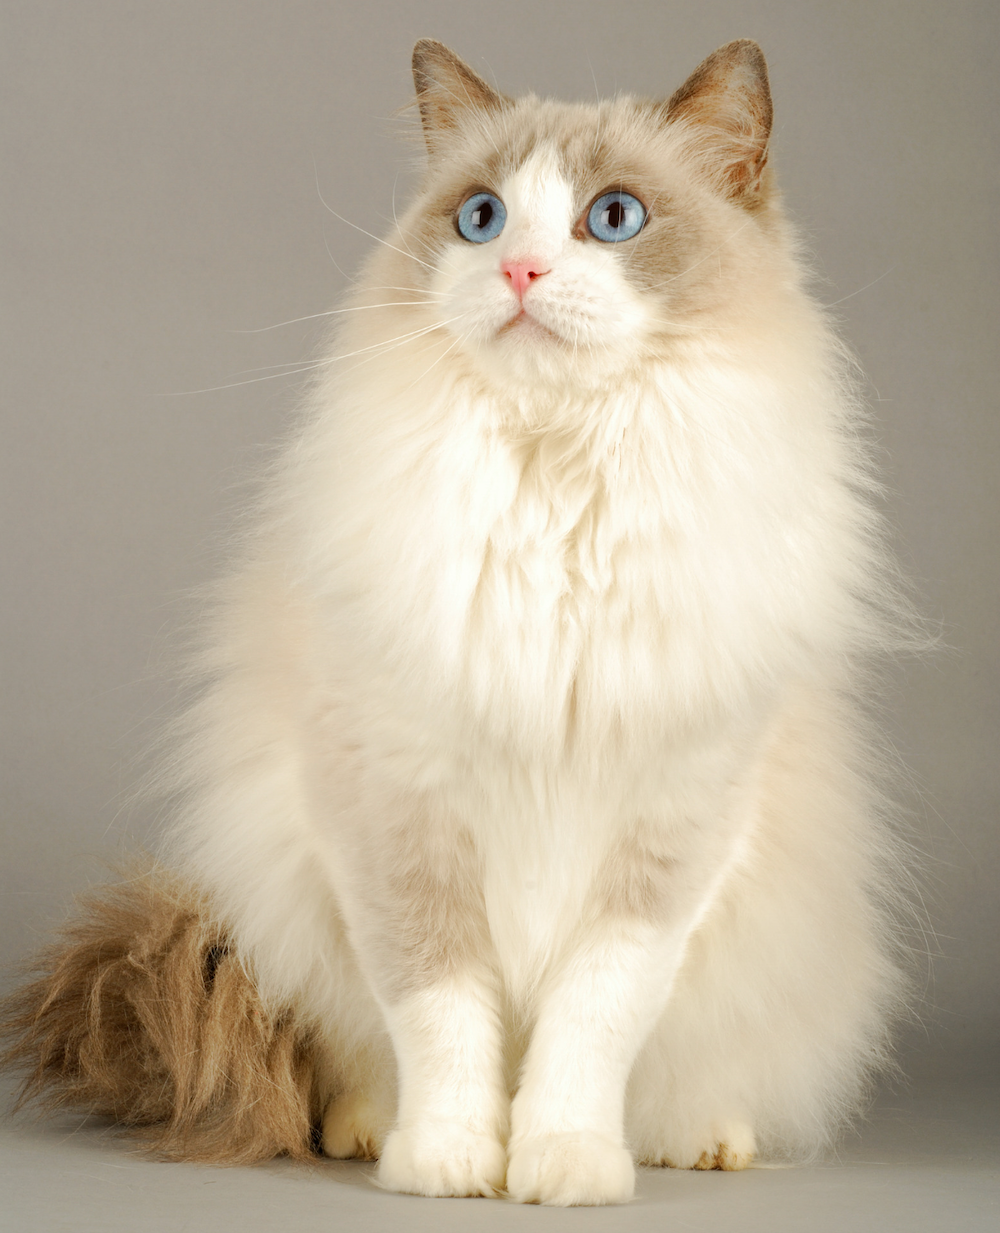 Ragdoll Cat Size: How Big Can They Get? Adult Size & Weight